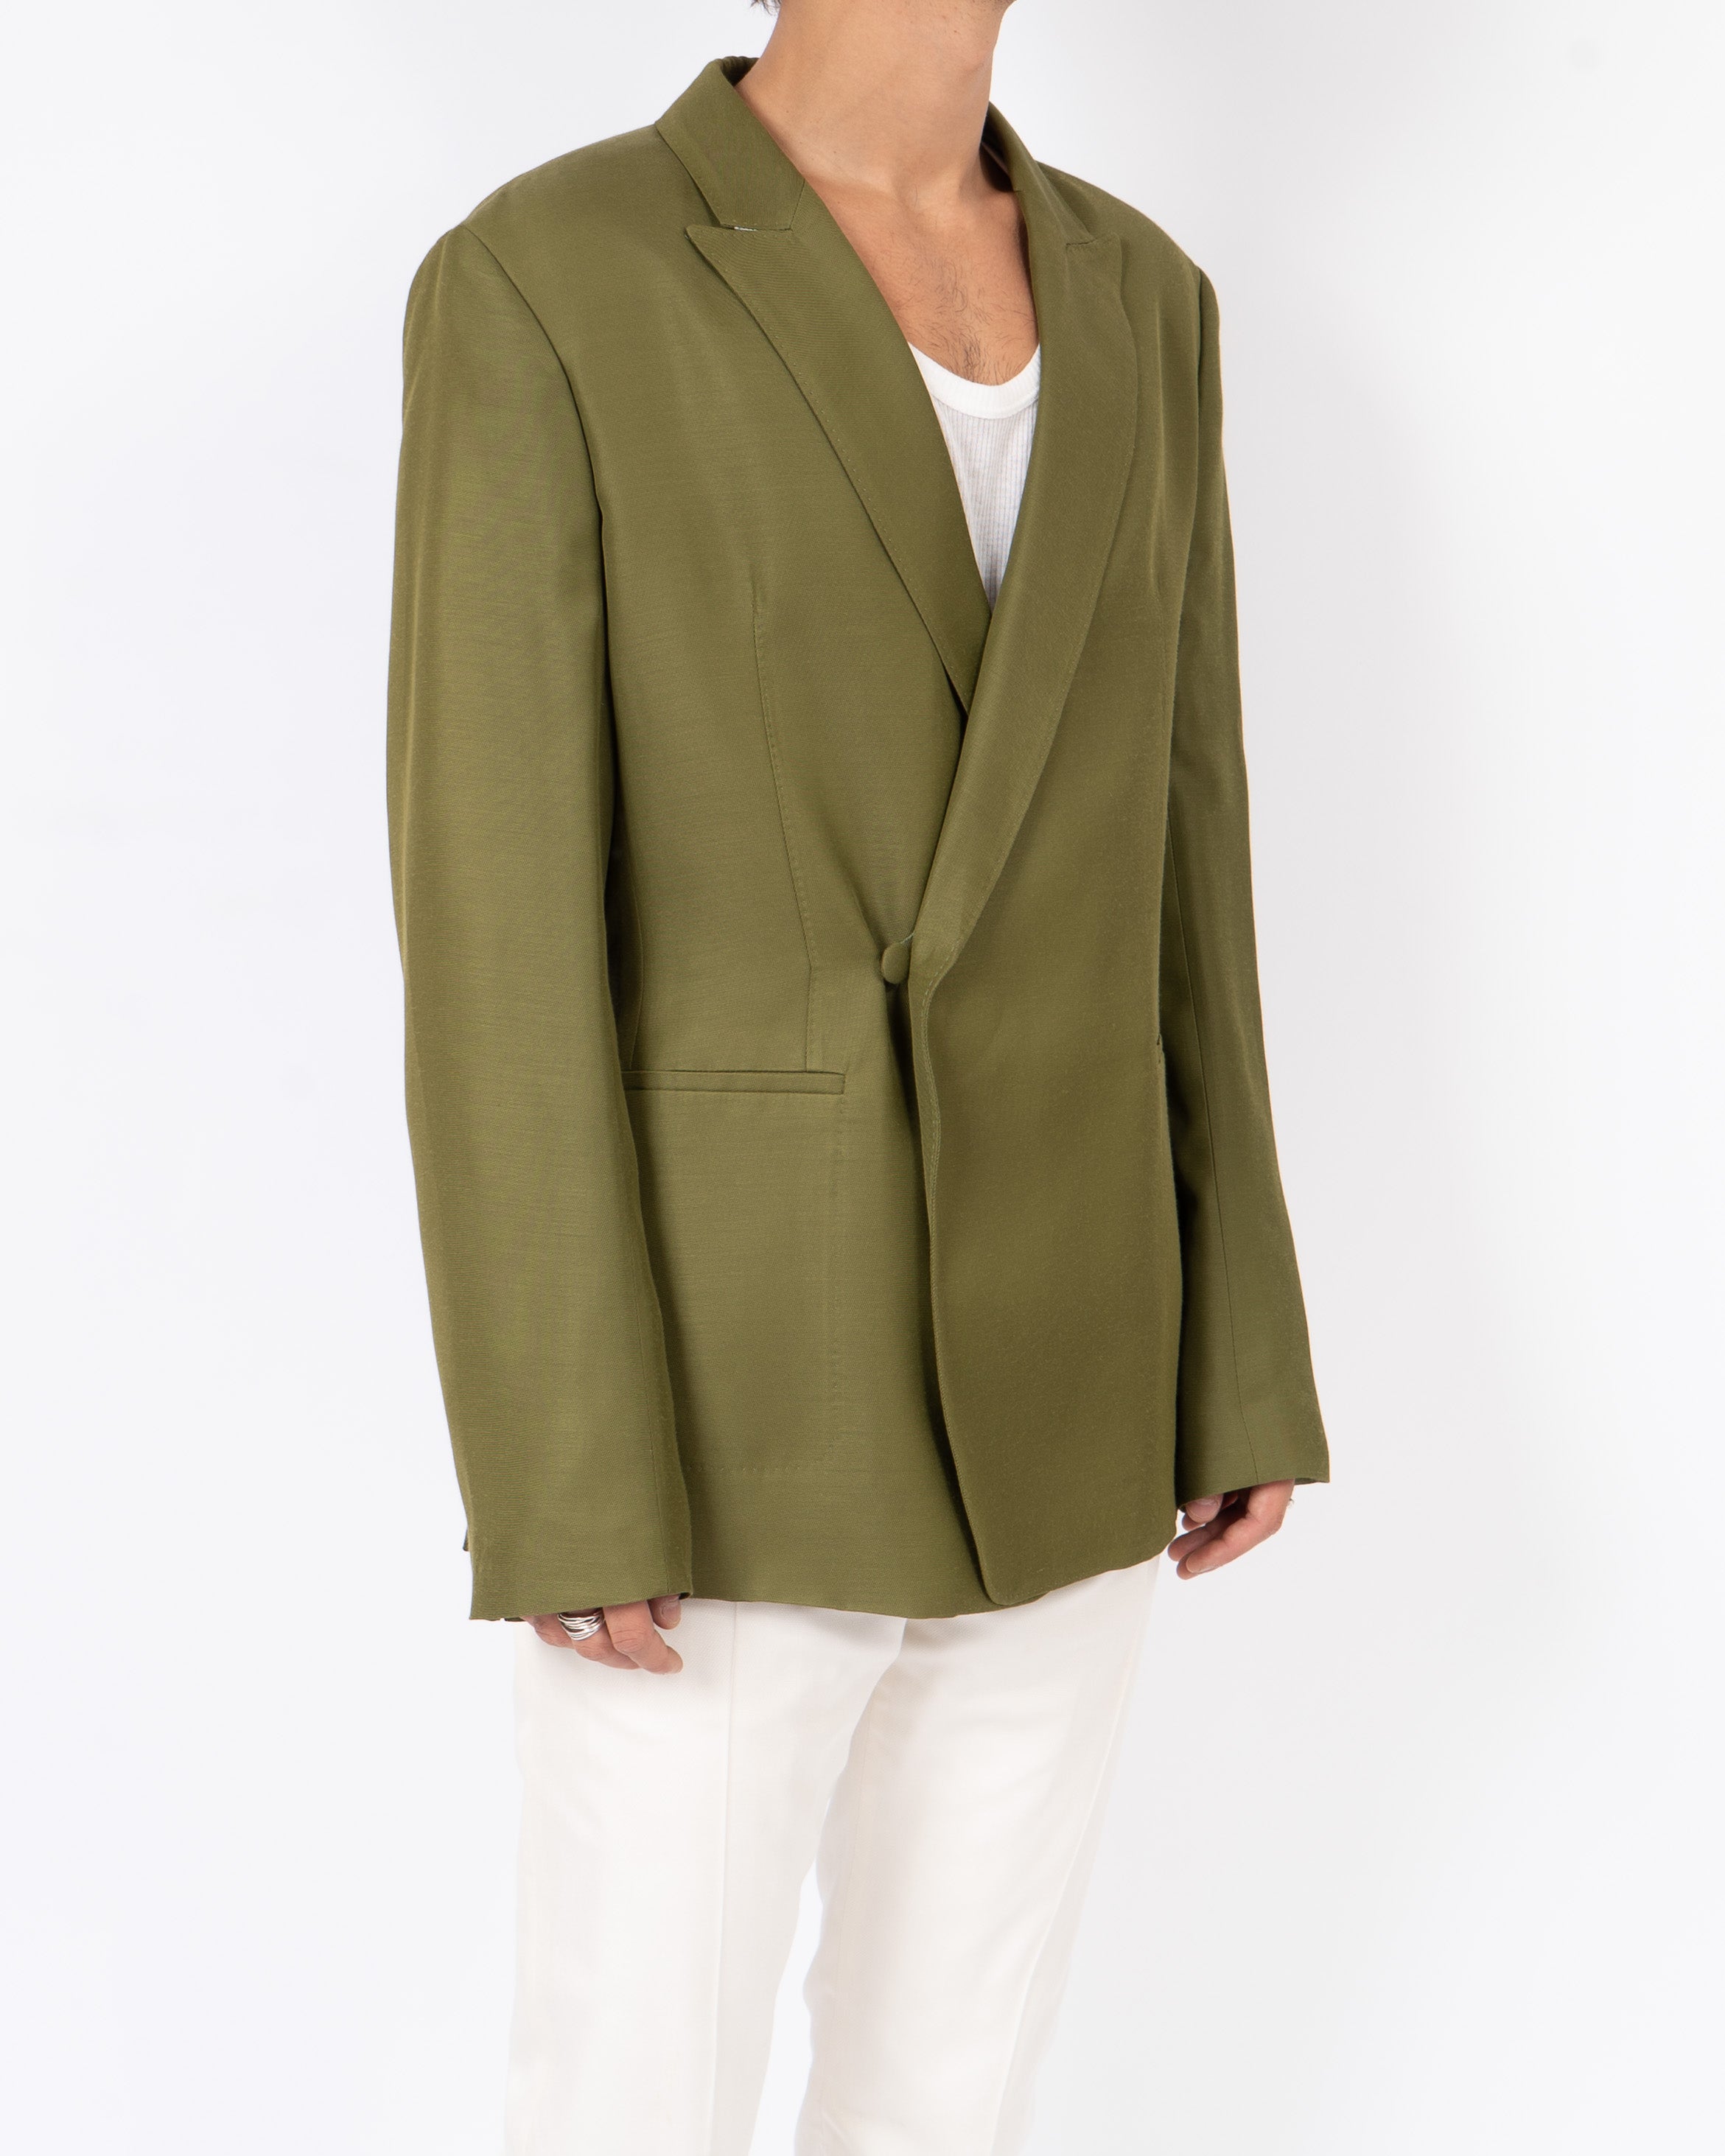 SS20 Double Breasted Green Blazer